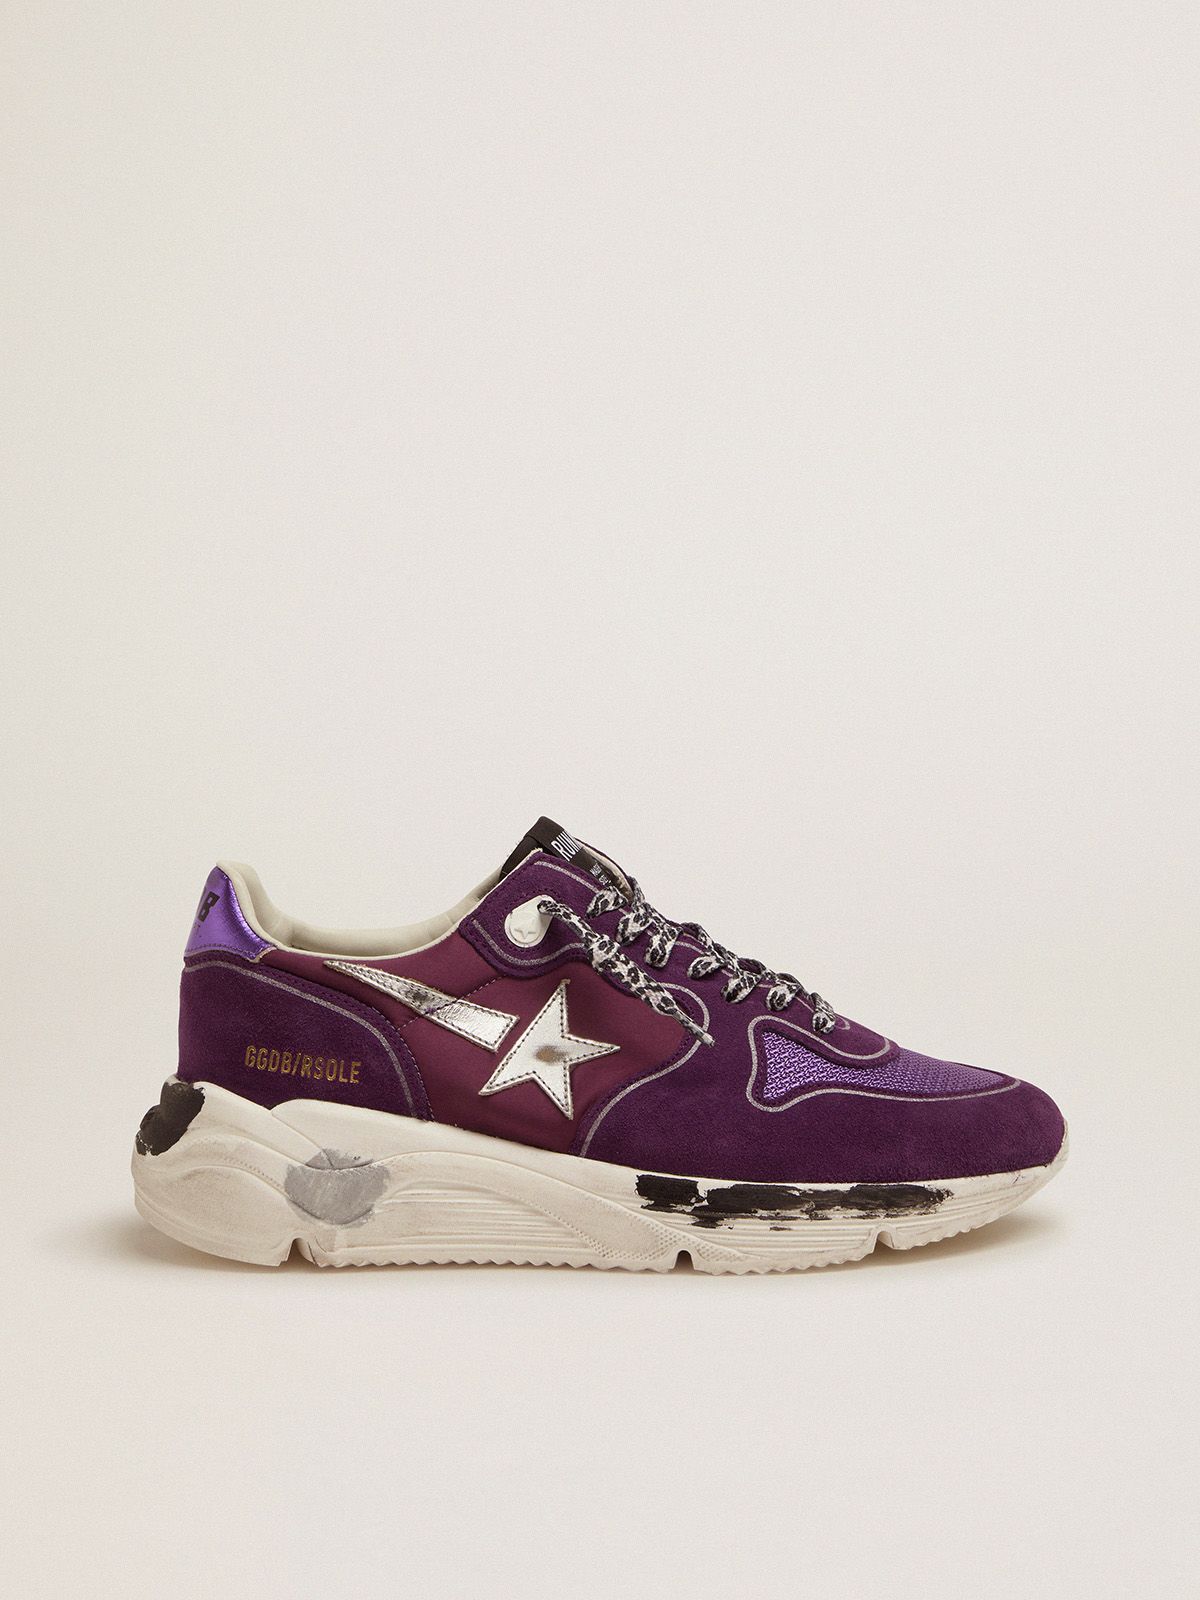 golden goose sneakers purple with heel mesh metallic leather Sole Suede, Running tab and